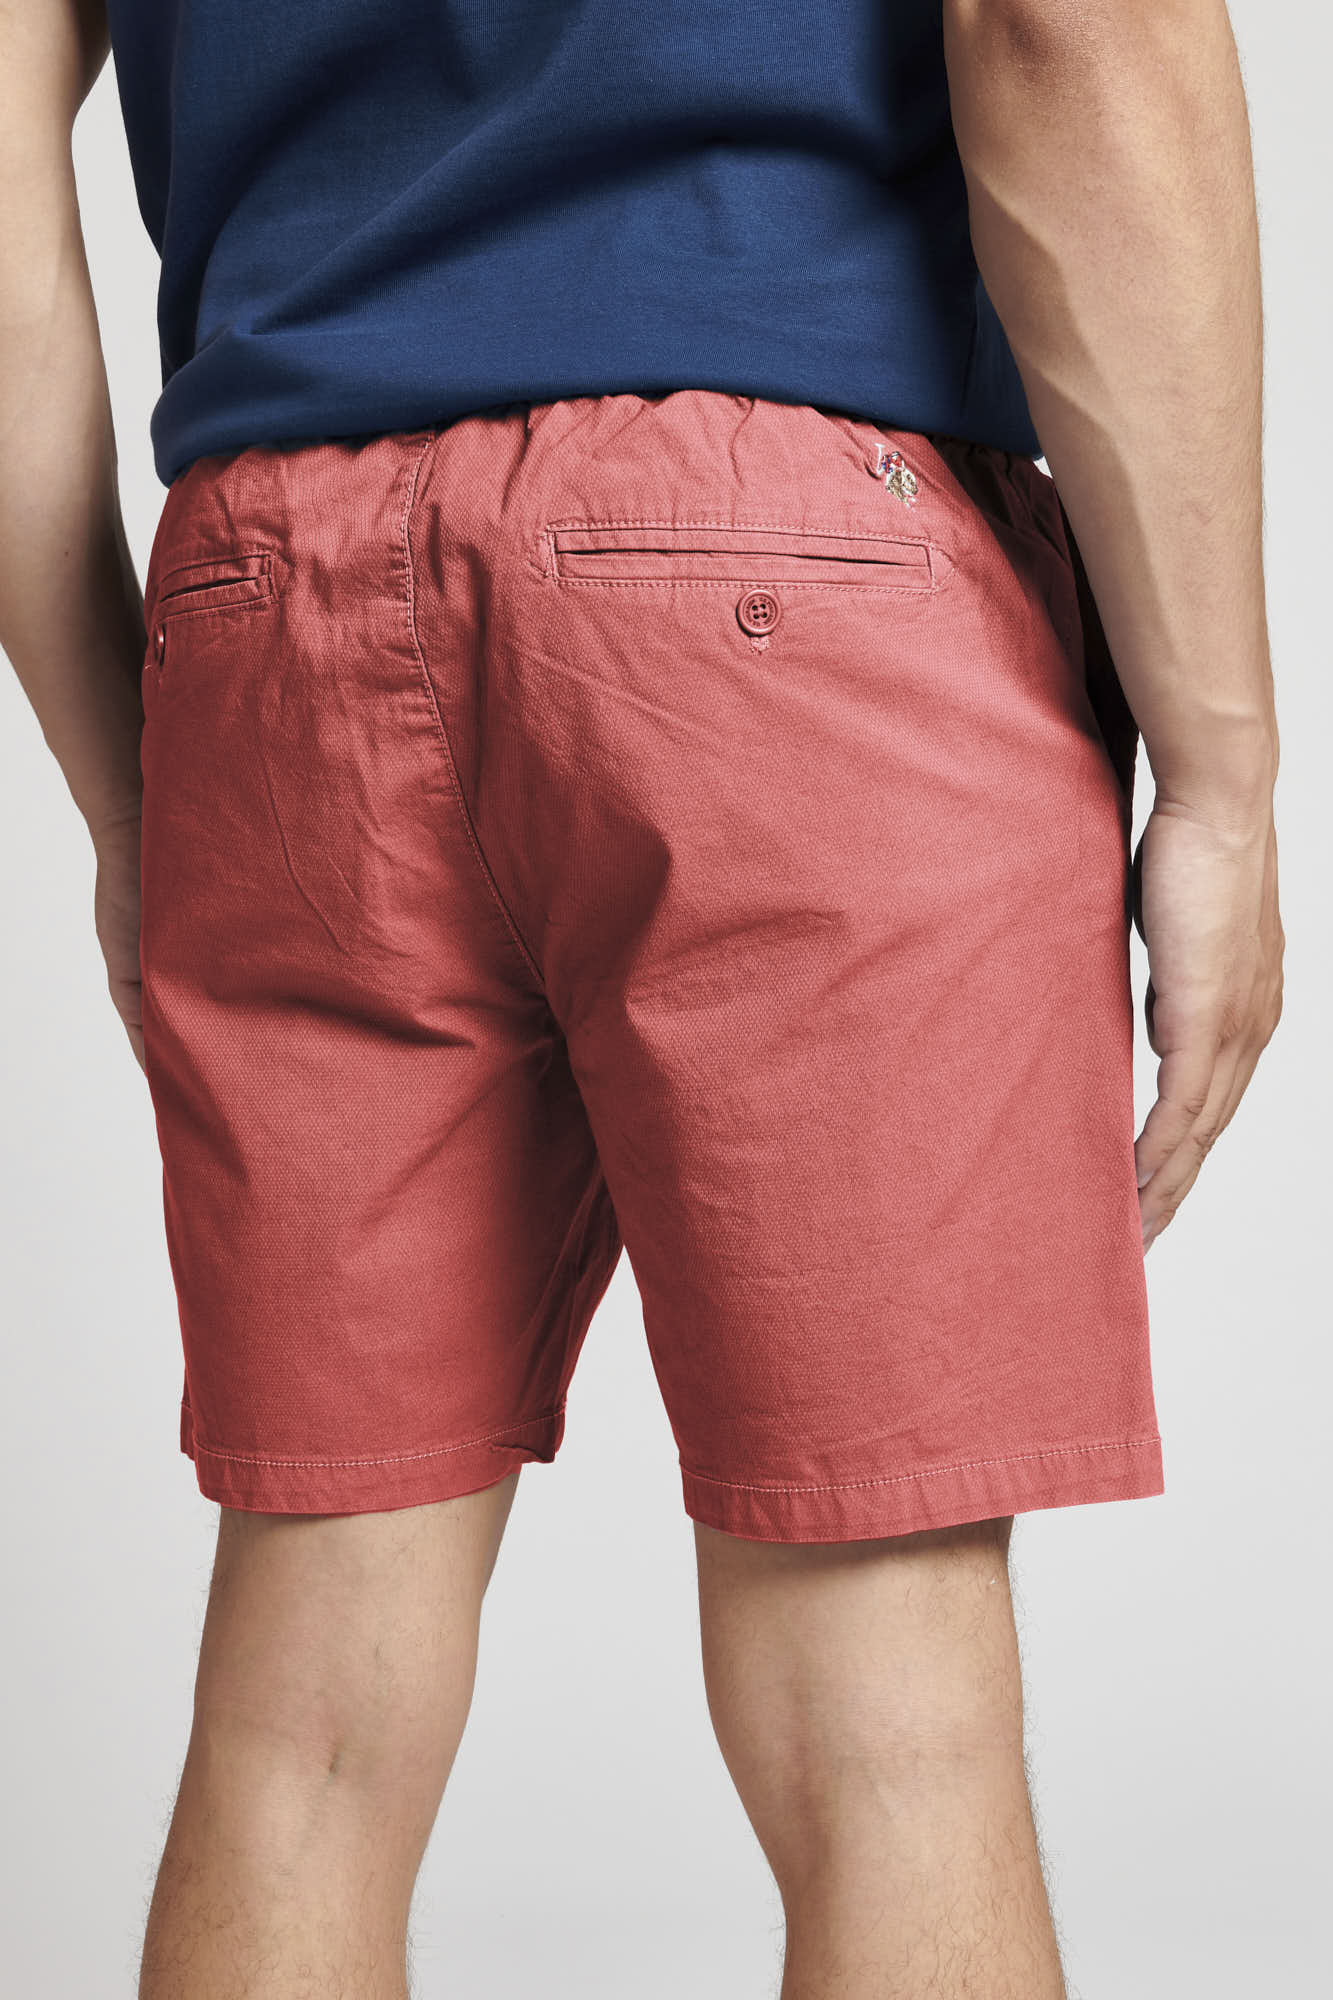 Mens Dobby Shorts in Cranberry